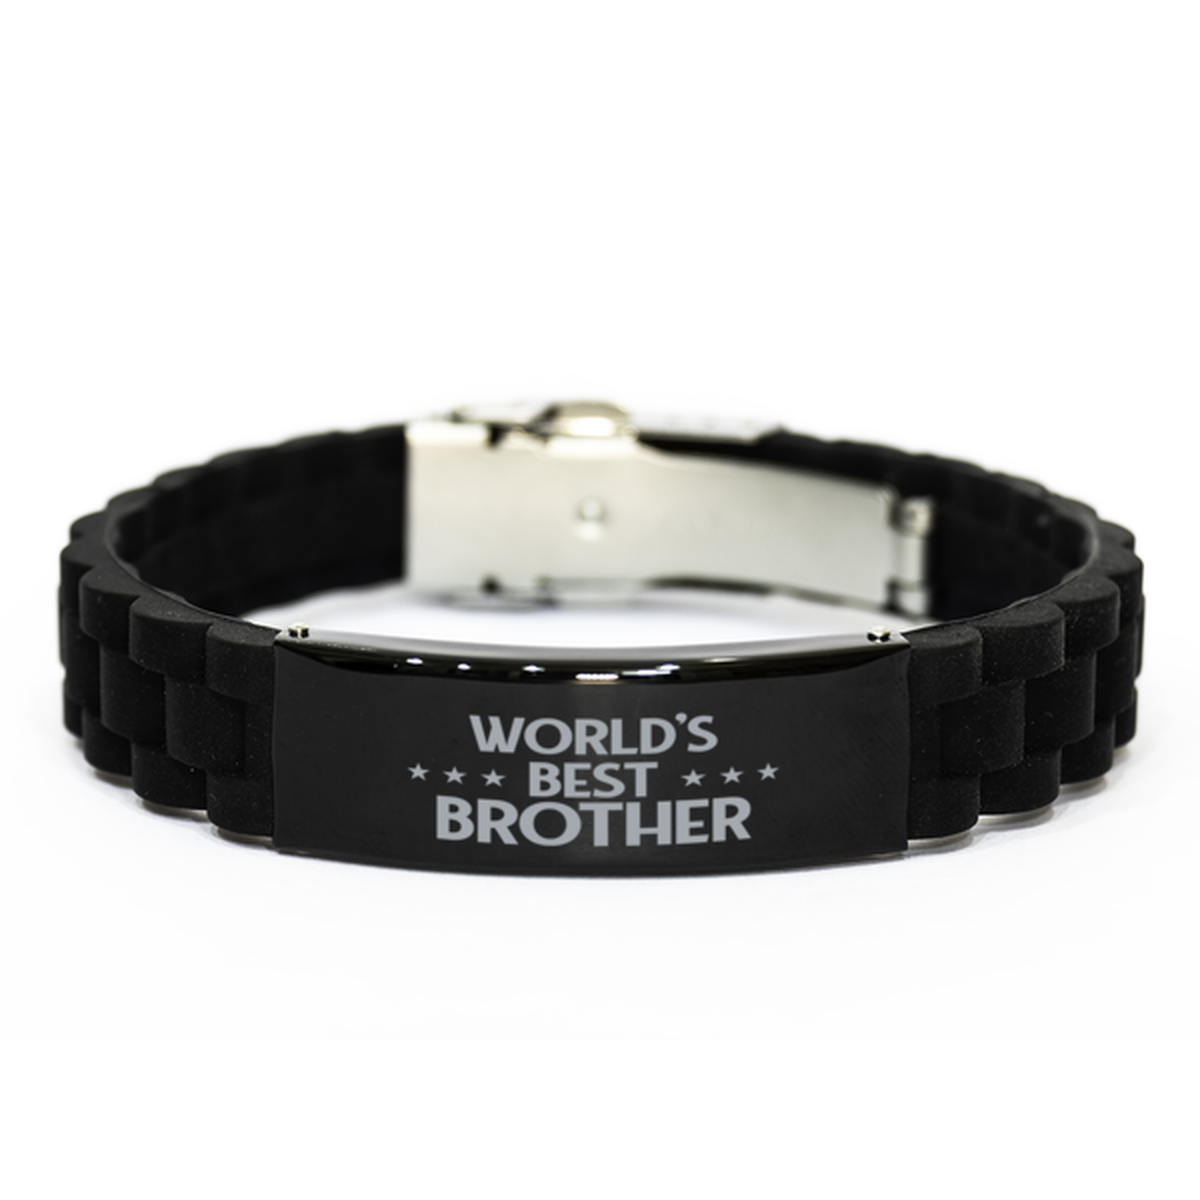 World's Best Brother Gifts, Funny Black Engraved Bracelet For Brother, Family Gifts For Men